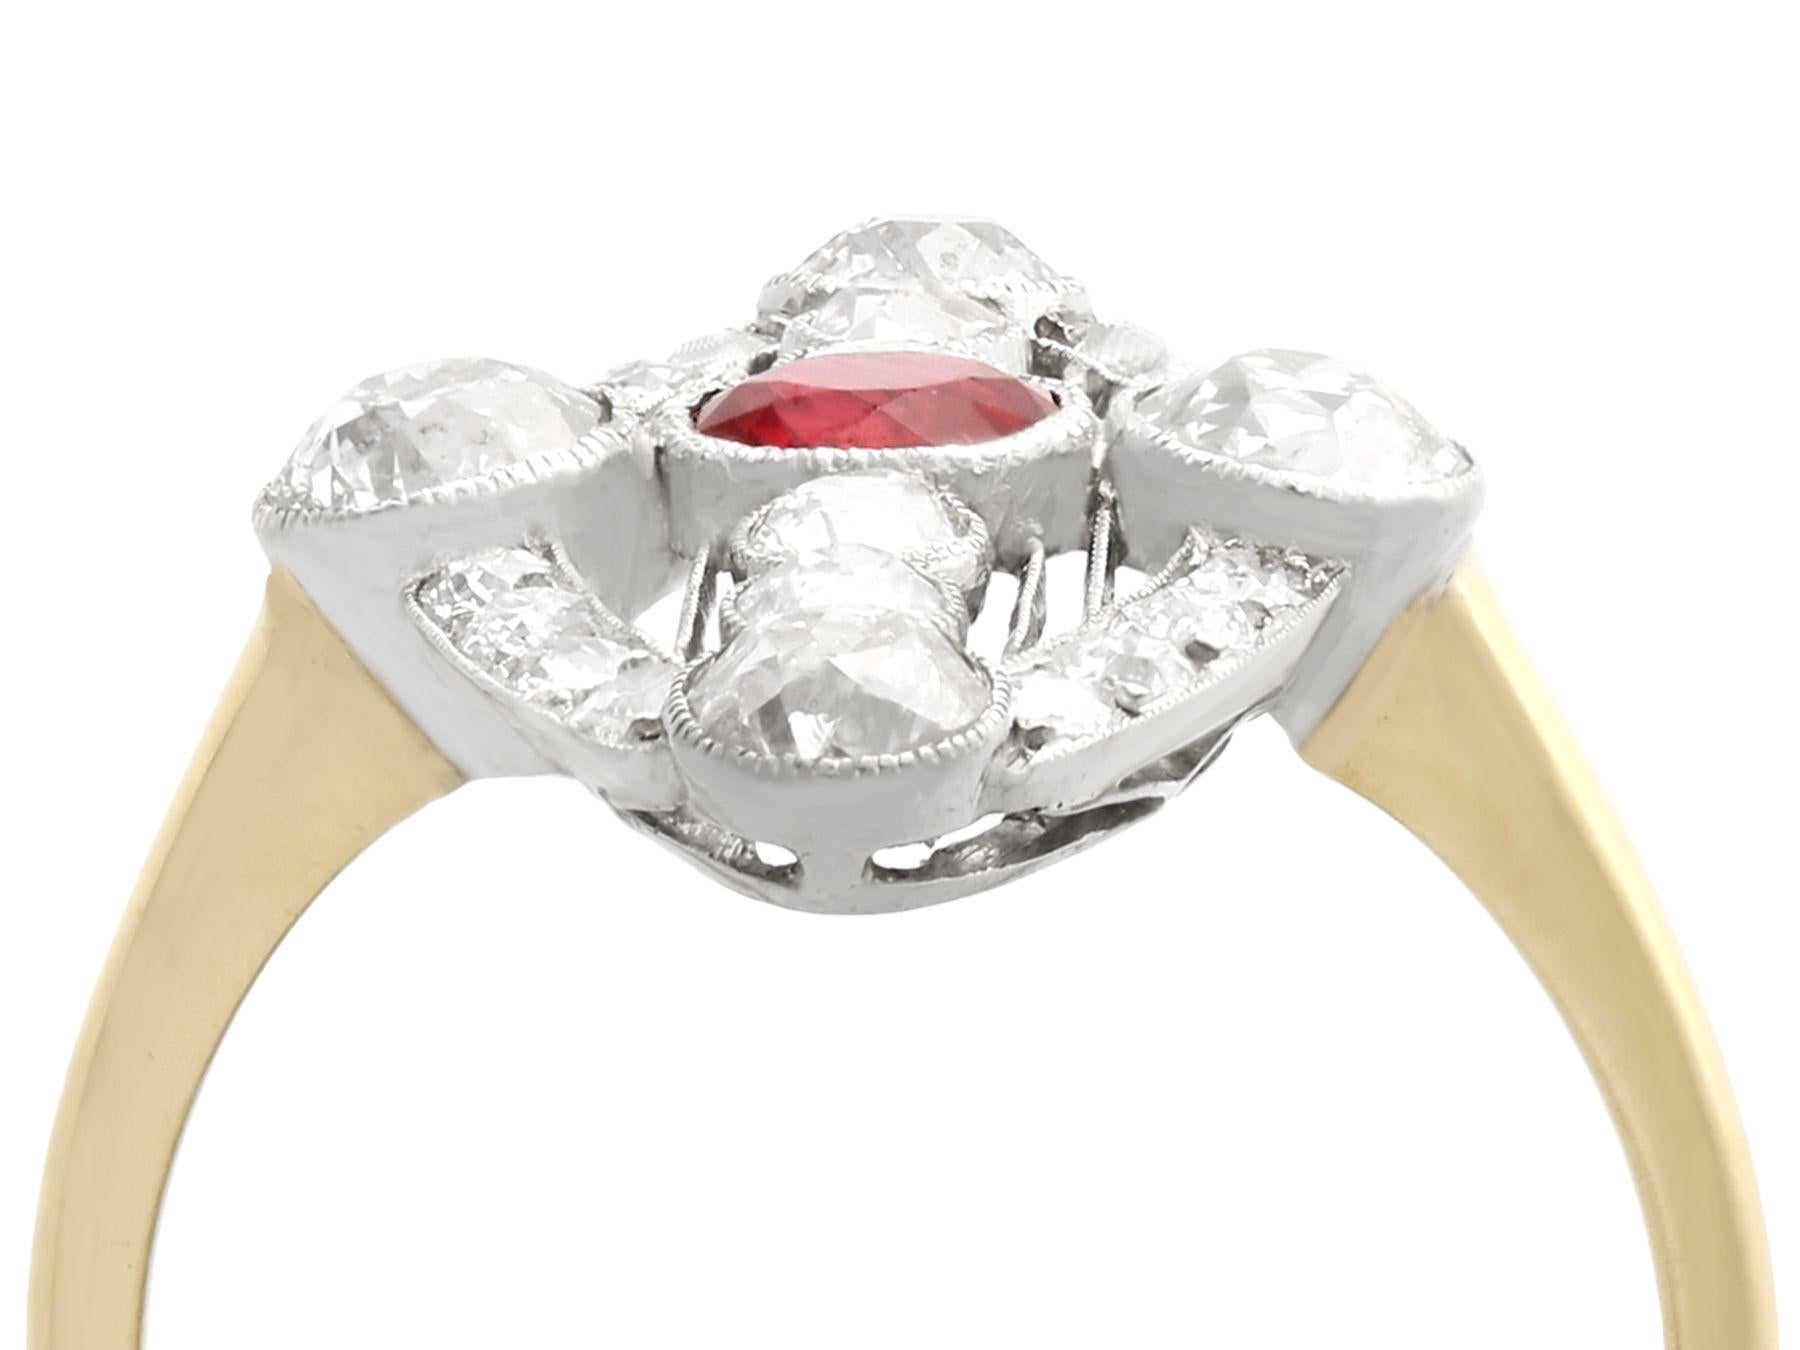 A stunning Art Deco 0.62 carat Mozambique ruby and 1.88 carat diamond, 18 karat yellow gold and 18 karat white gold set marquise ring; part of our diverse antique jewellery collections.

This stunning, fine and impressive ruby and diamond marquise